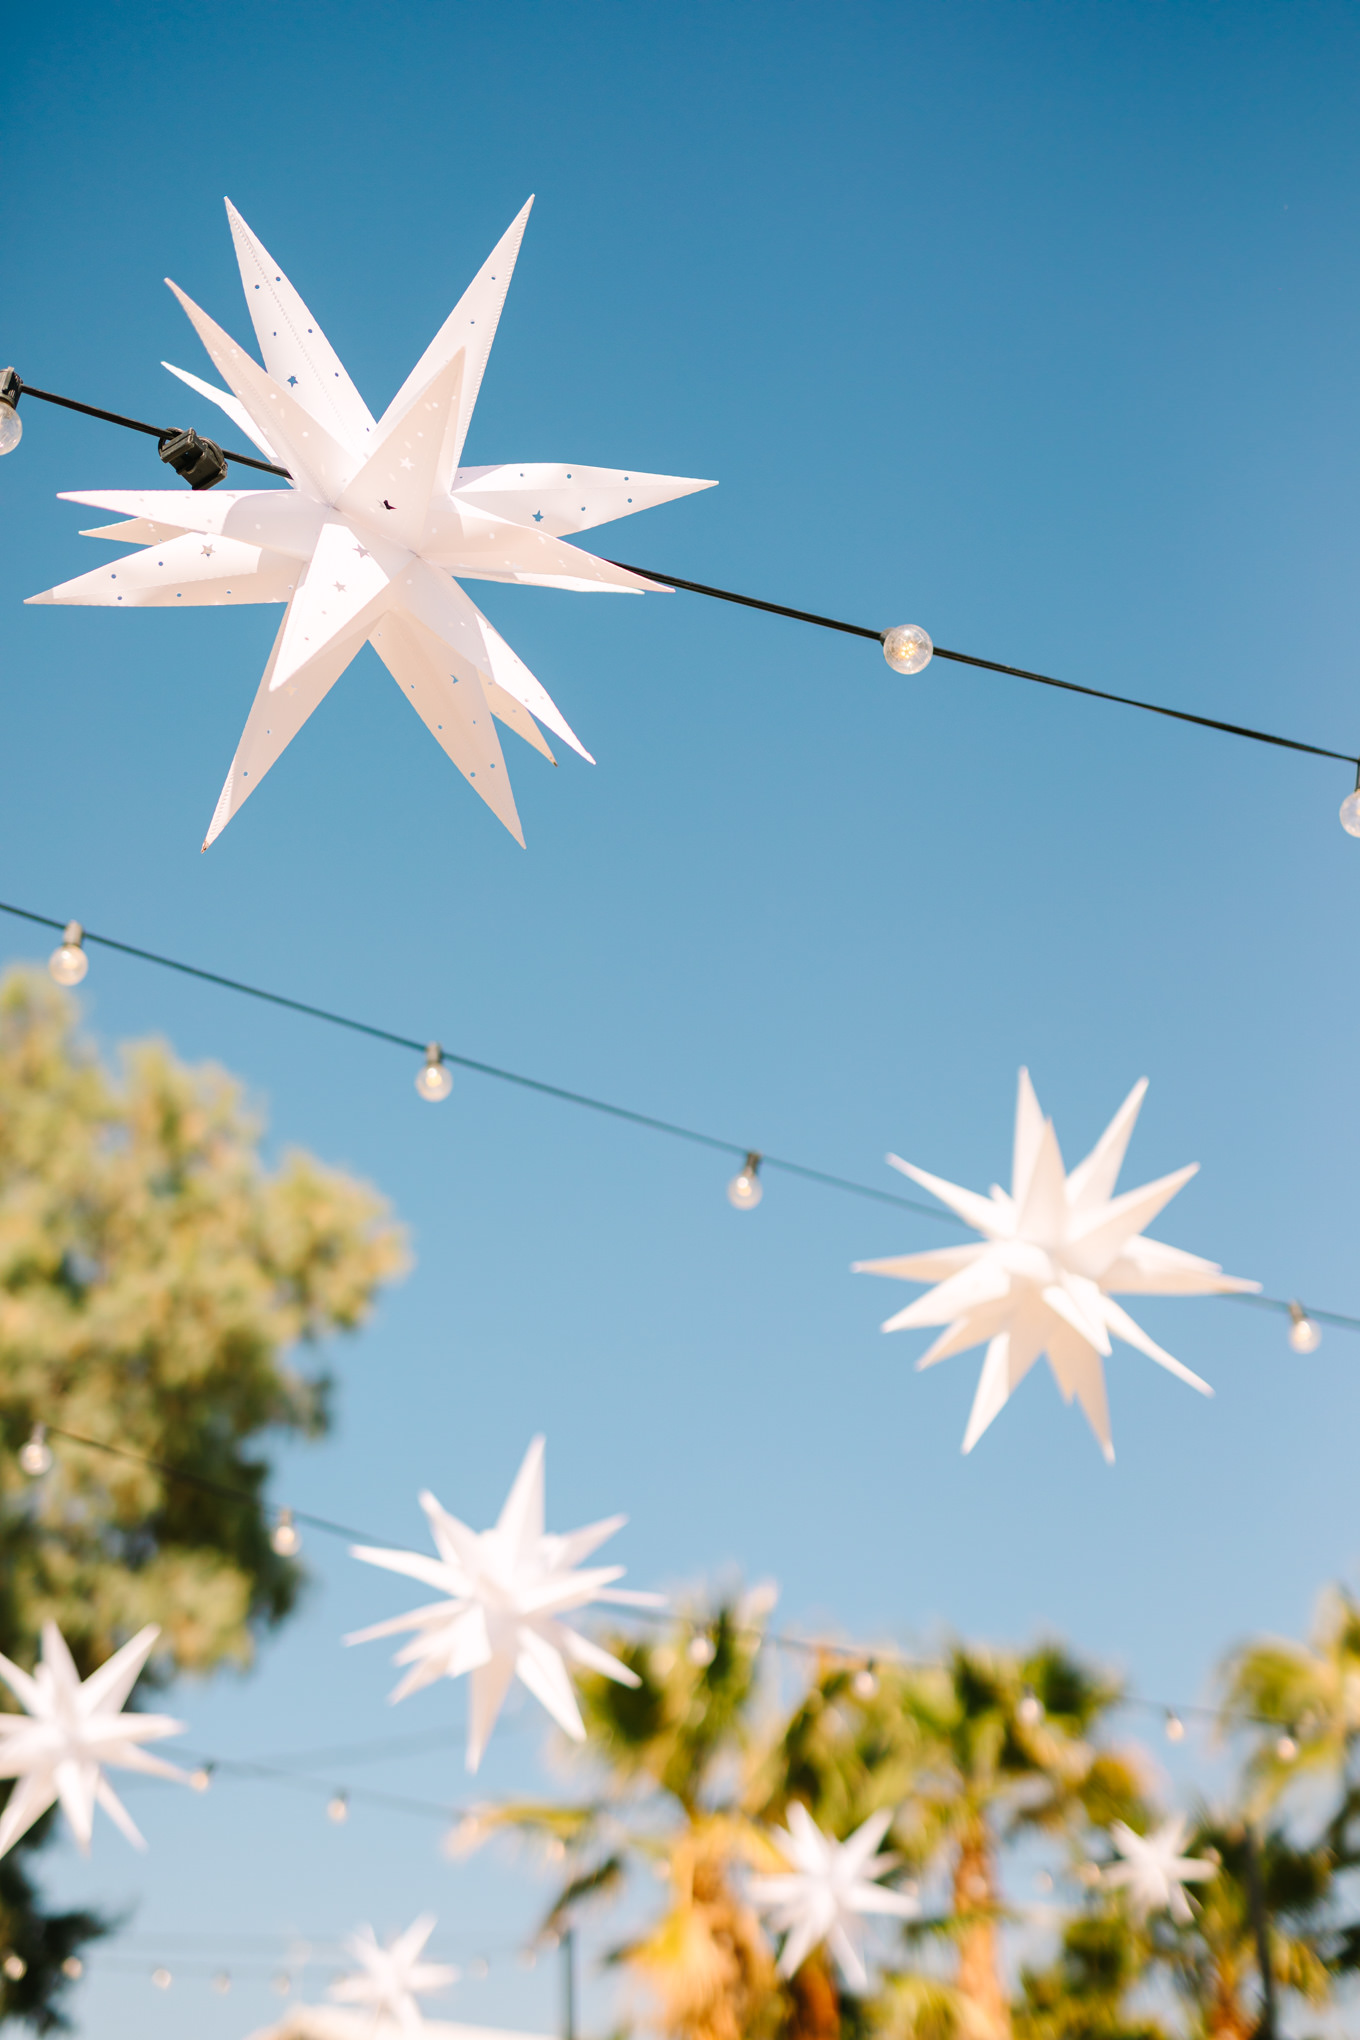 Hanging stars at wedding reception | Pink and orange Lautner Compound wedding | Colorful Palm Springs wedding photography | #palmspringsphotographer #palmspringswedding #lautnercompound #southerncaliforniawedding  Source: Mary Costa Photography | Los Angeles